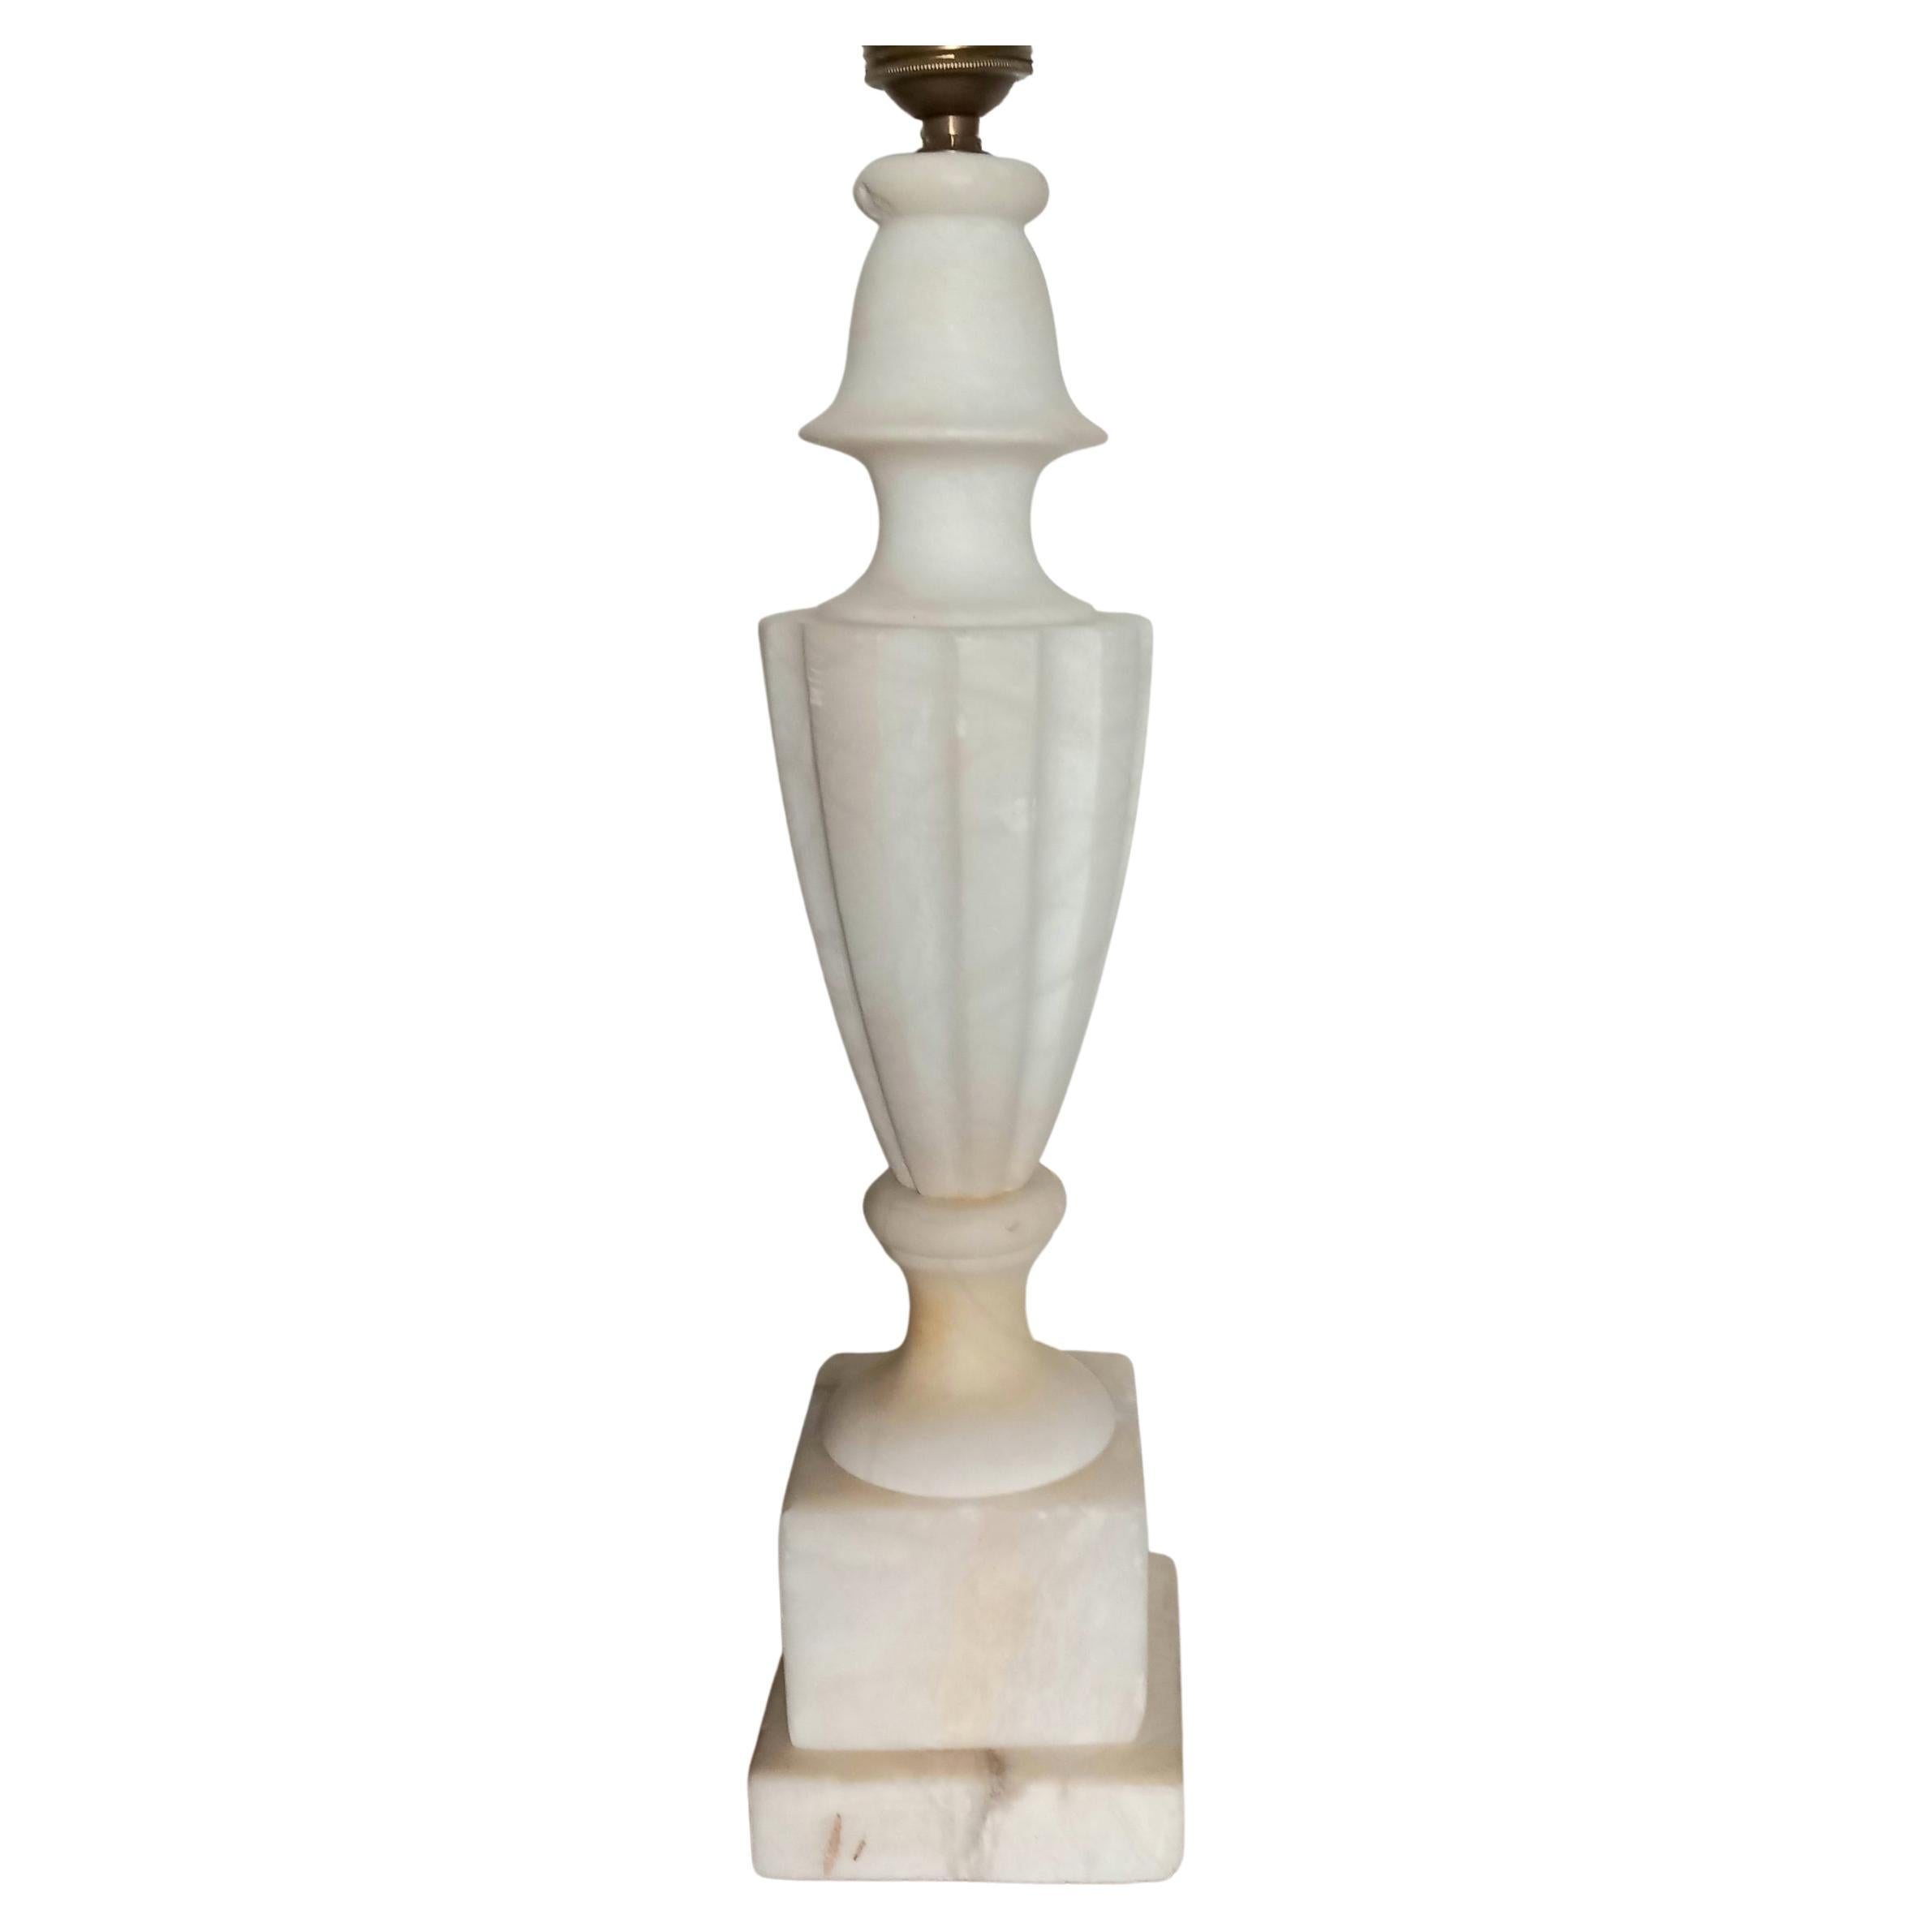 Beautiful white alabaster or white statuario marble lamp. It is a solid and heavy lamp,
Nice texture and patina.
Perfect lamp to place on a console or on a sideboard.
Beautiful lamp. It is a very solid albaster table lamp. with classic style, almost